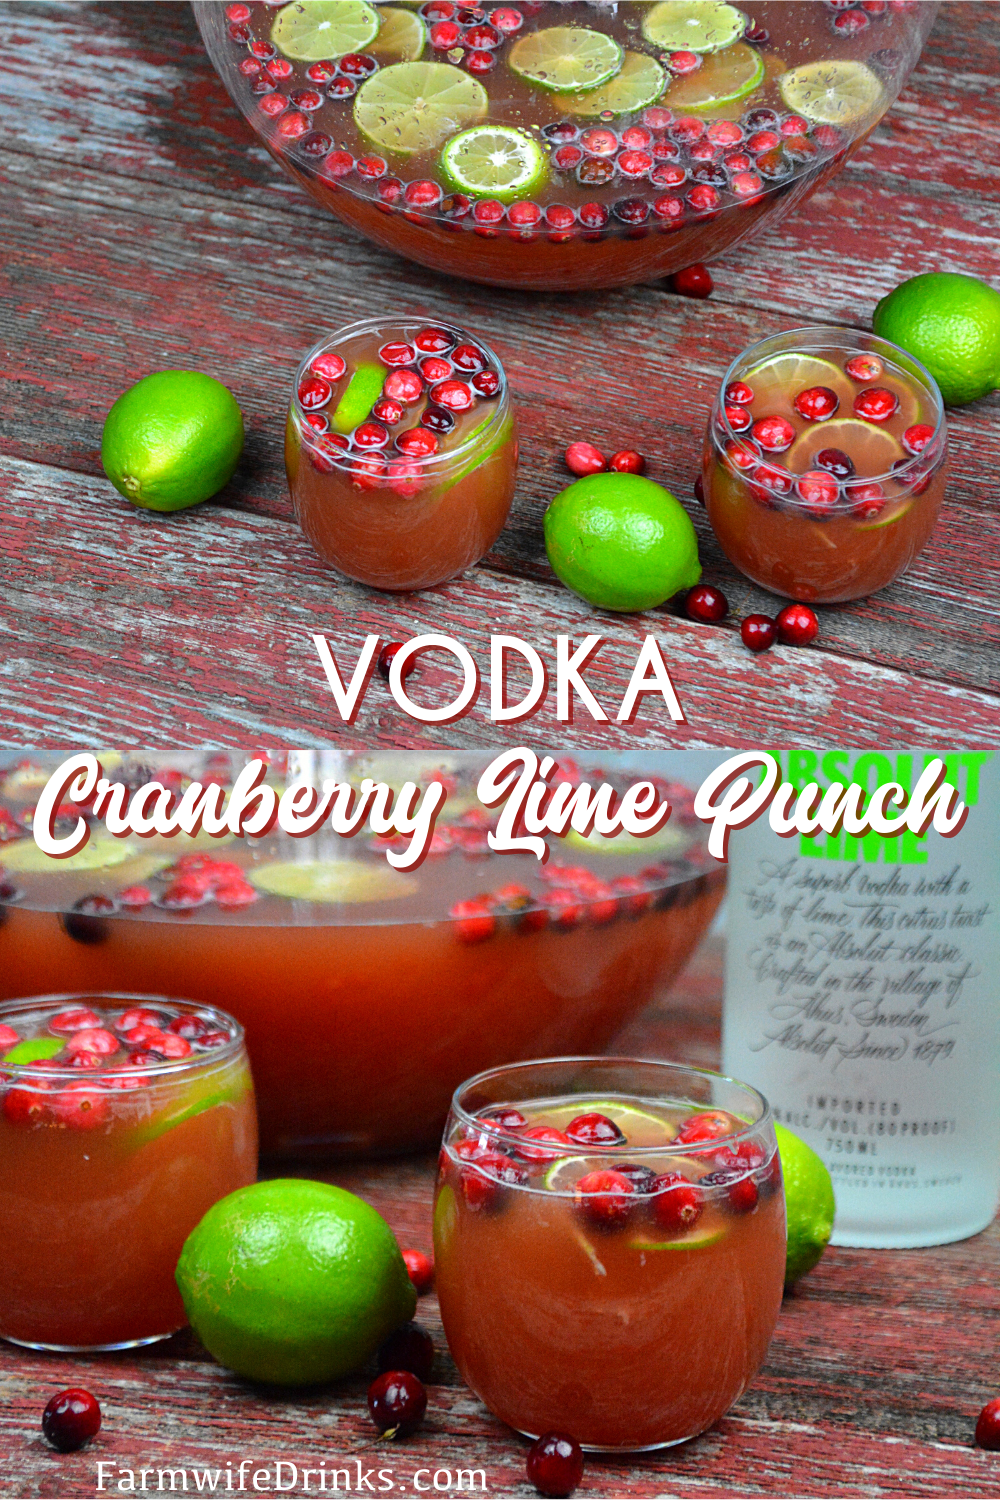 Vodka-Spiked Cranberry Lime Punch is the perfect Christmas punch as it can be kid friendly and have a dose of lime vodka for the adults.